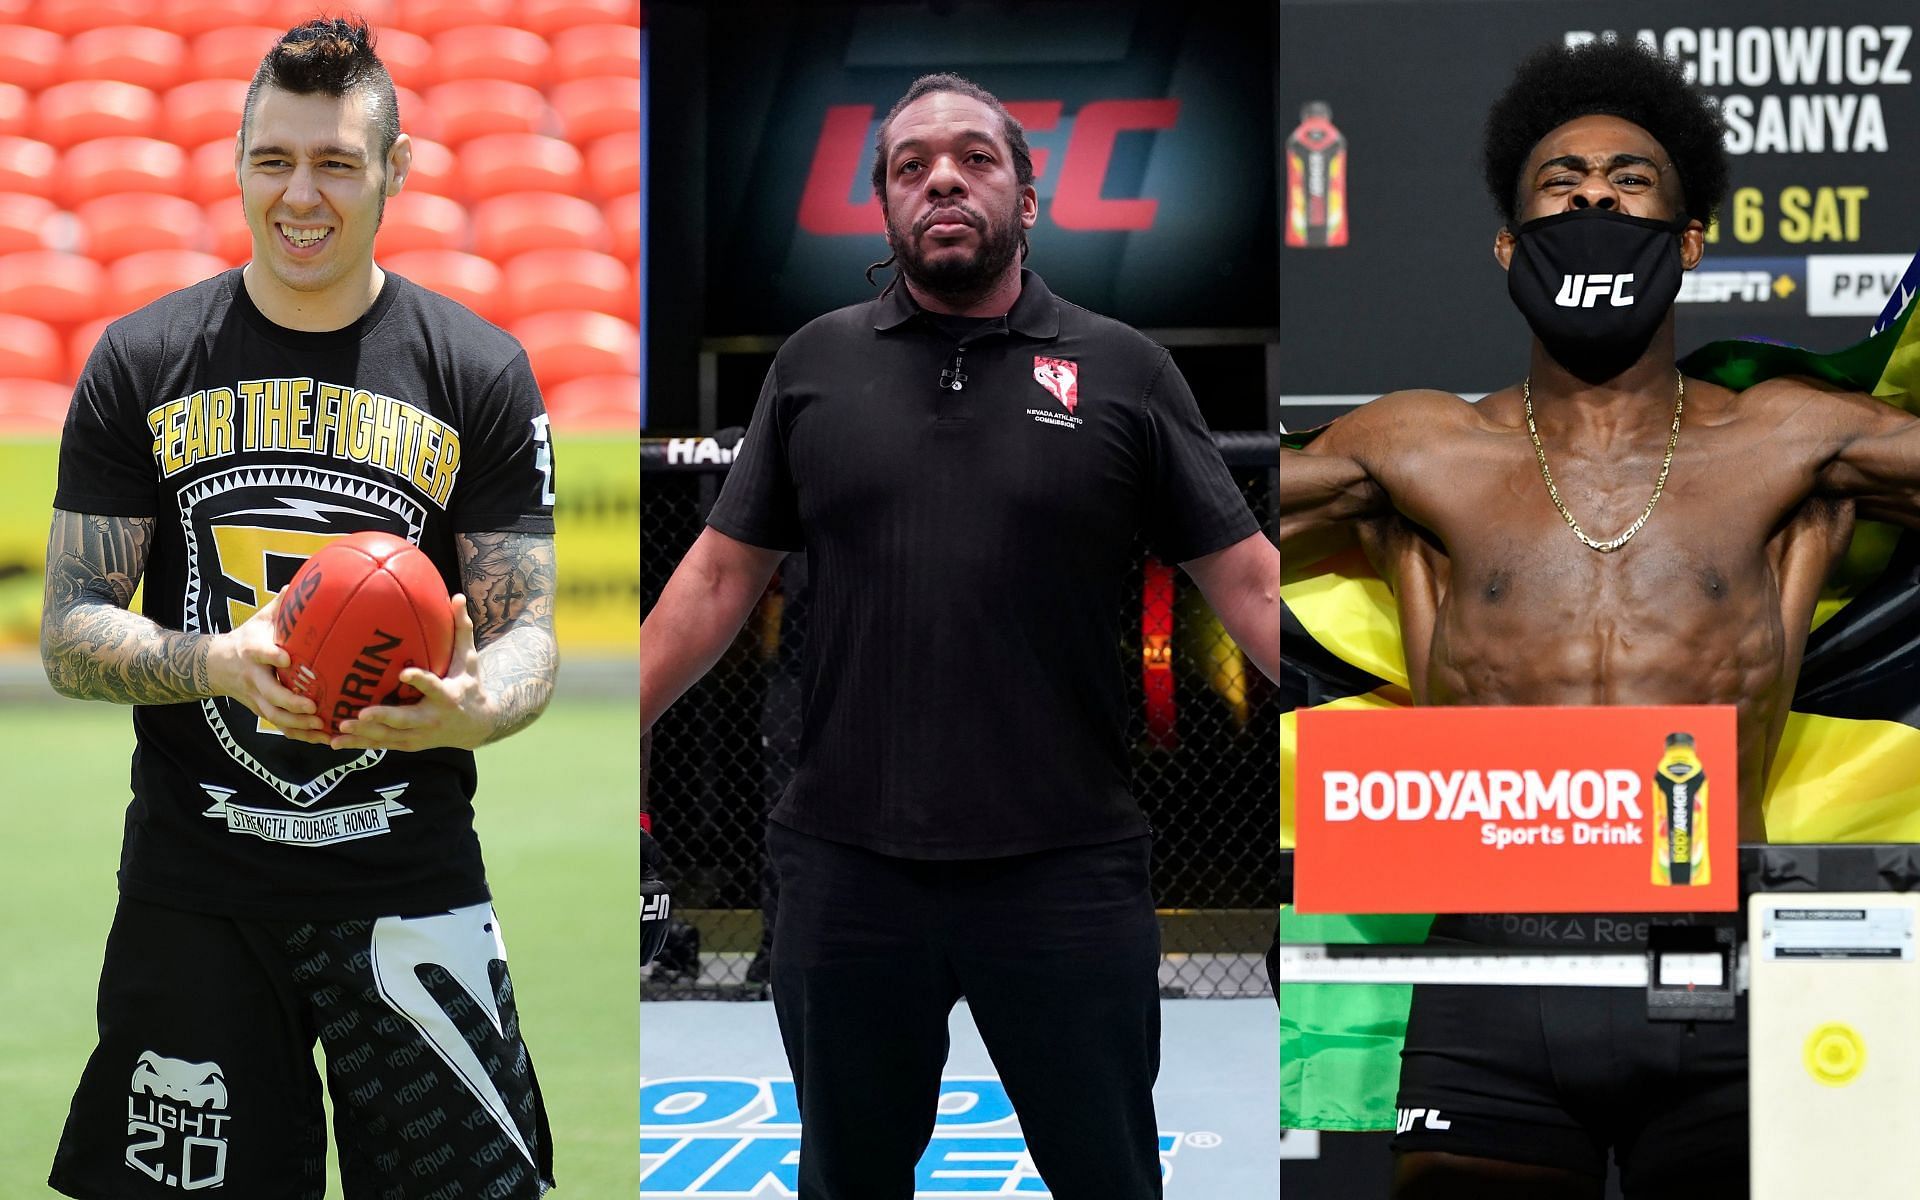 Dan Hardy (left), Herb Dean (center) and Aljamain Sterling (right)